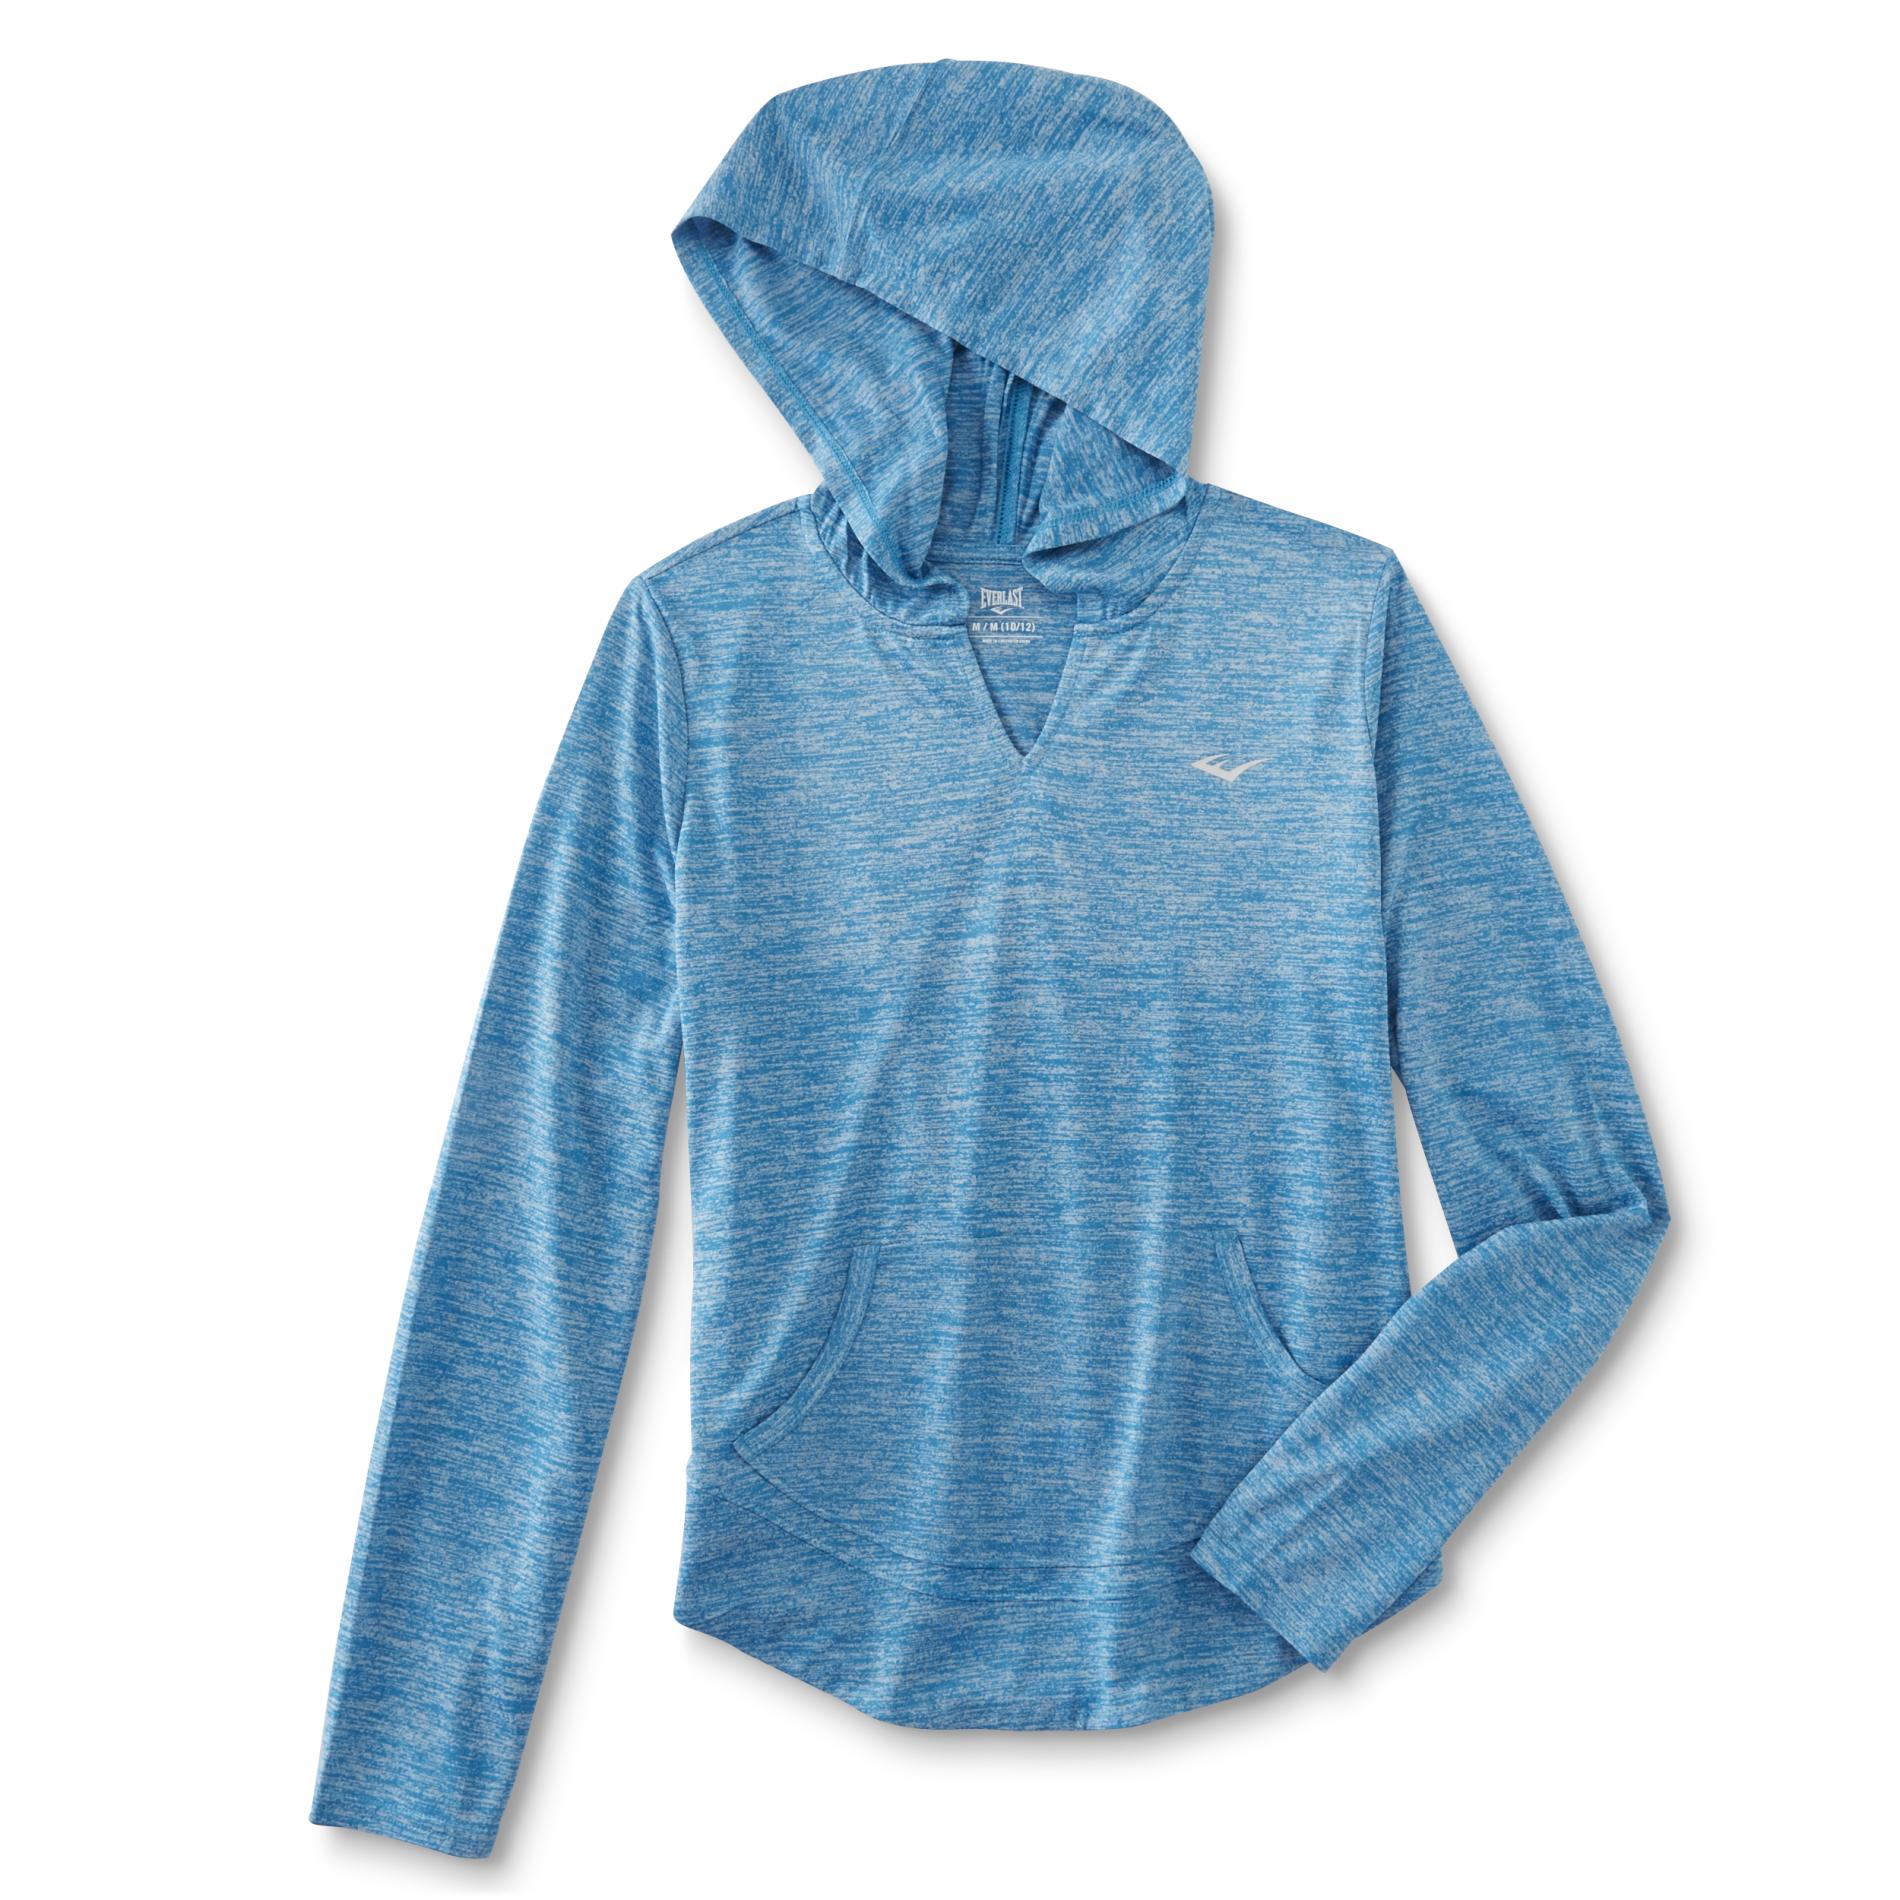 Everlast&reg; Girl's Hooded Athletic Top - Space-Dyed